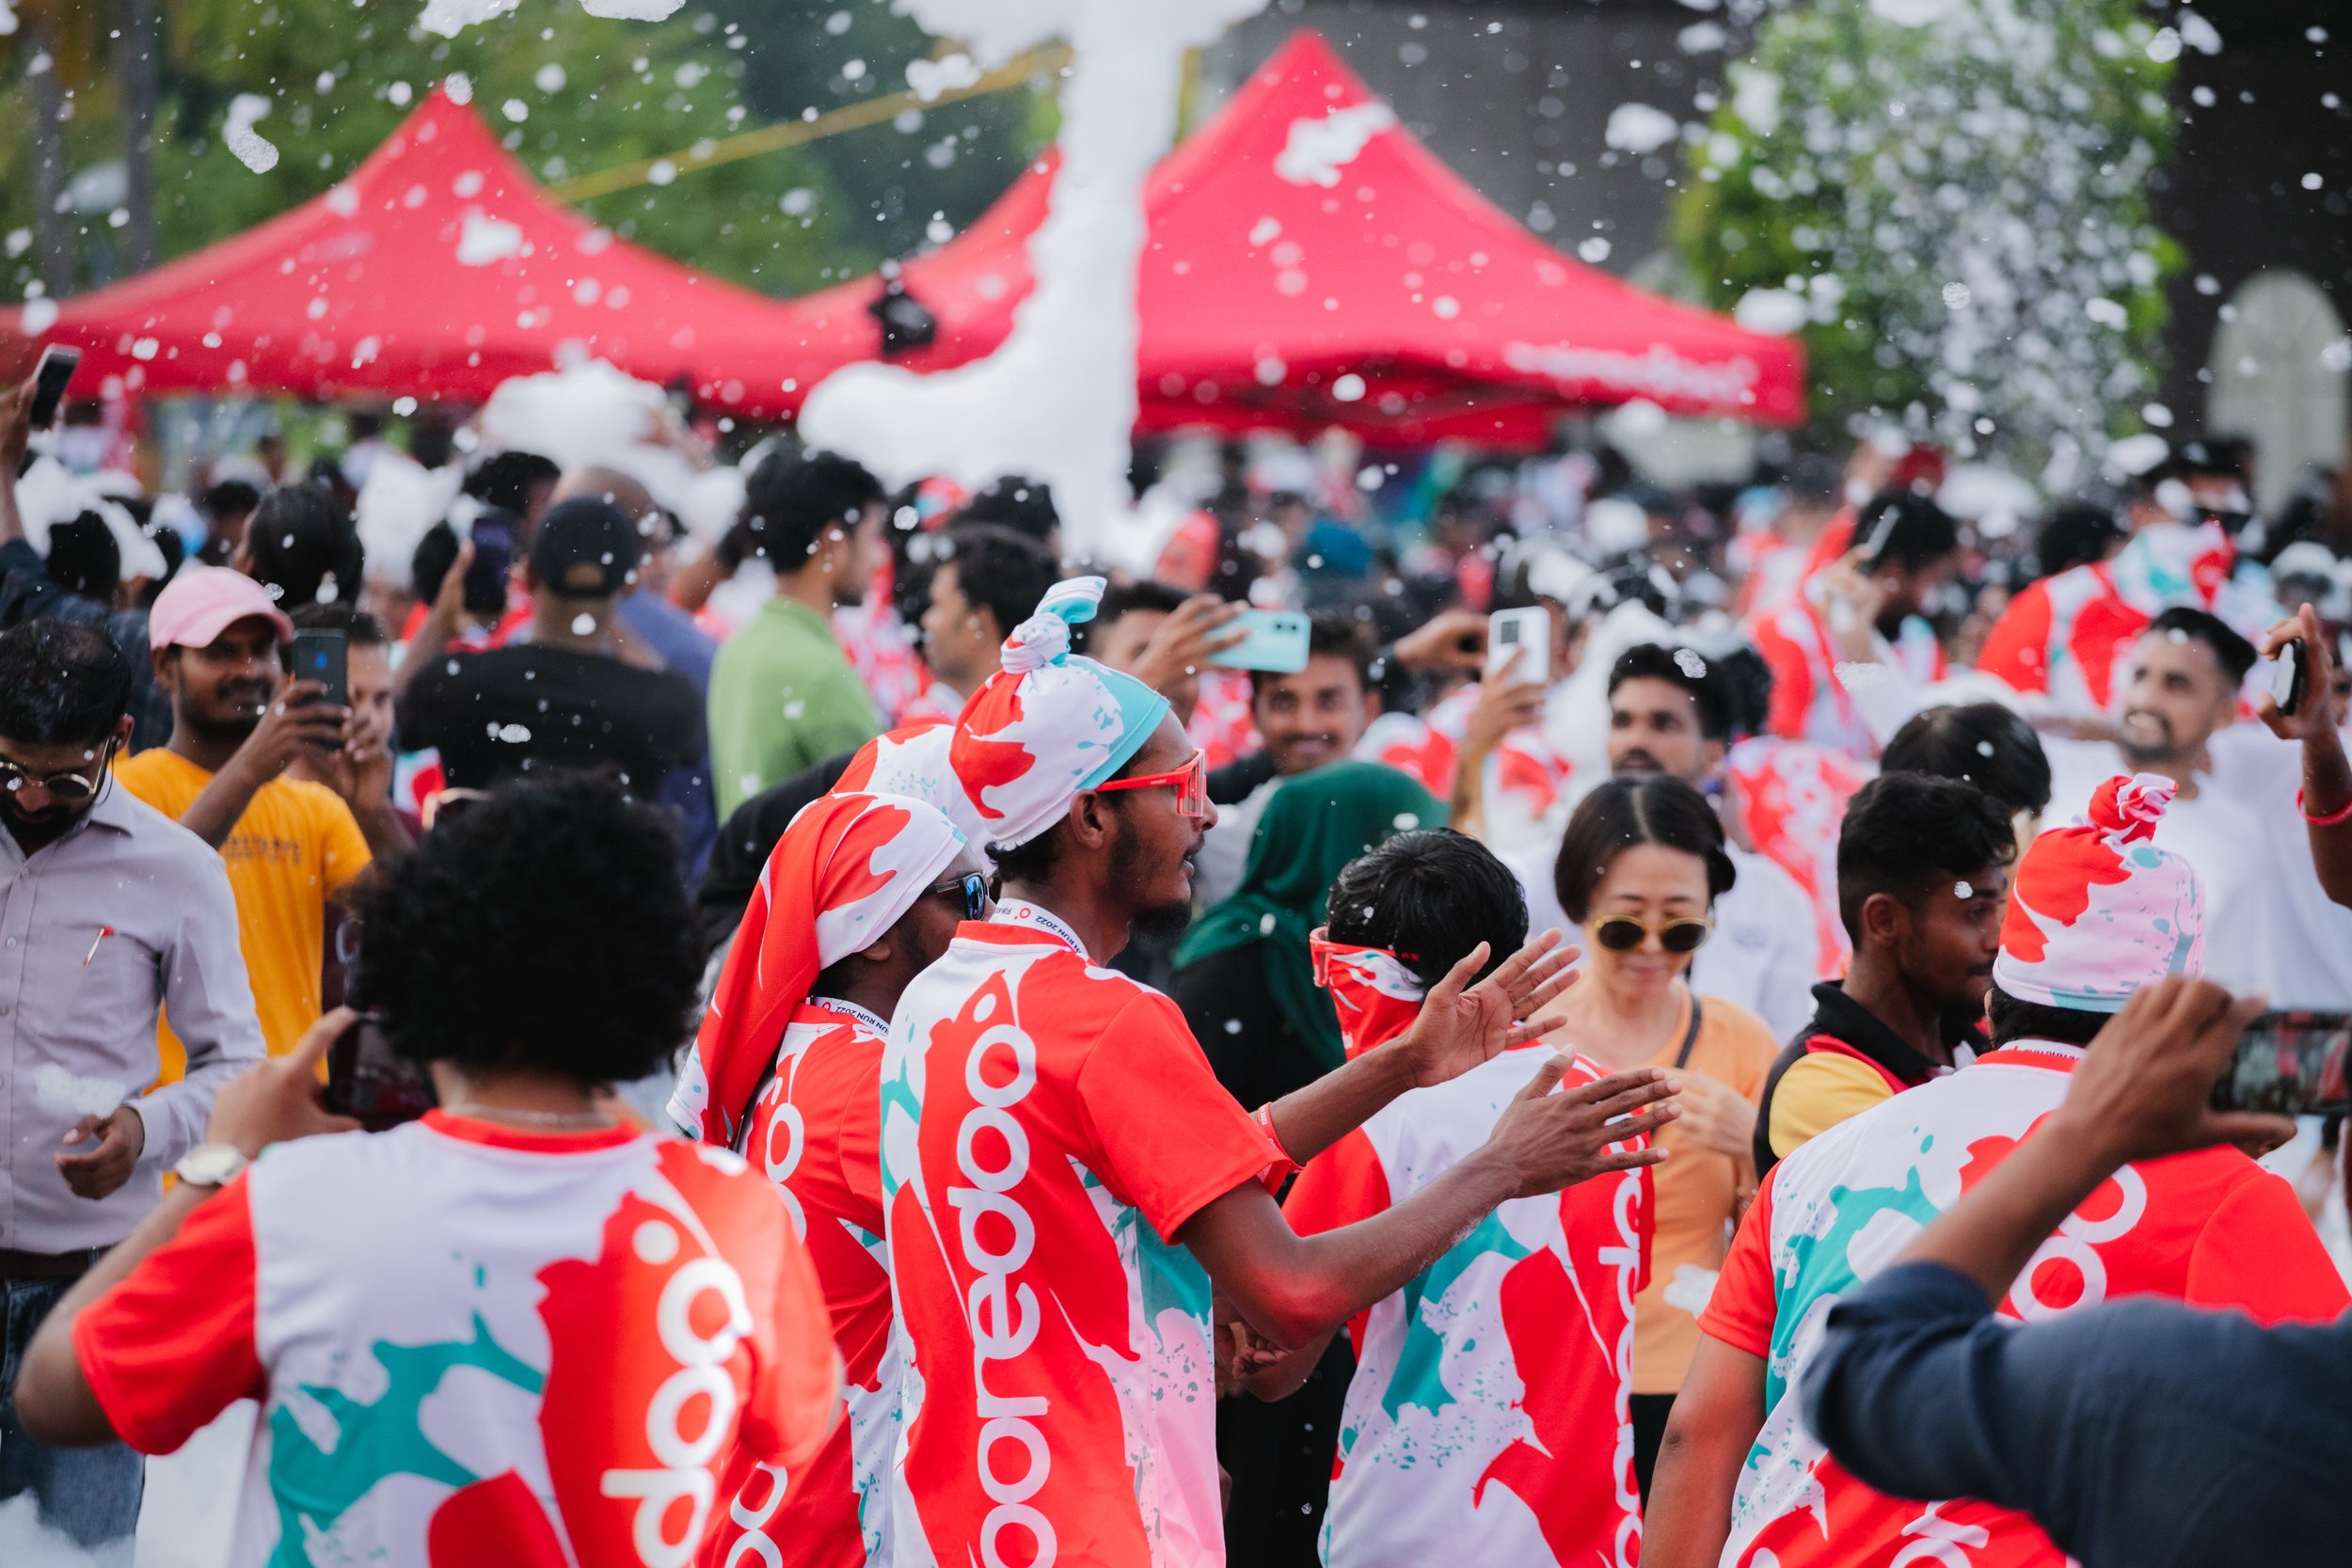 Ooredoo Maldives on X: ✨ Make your fitness goals a reality with